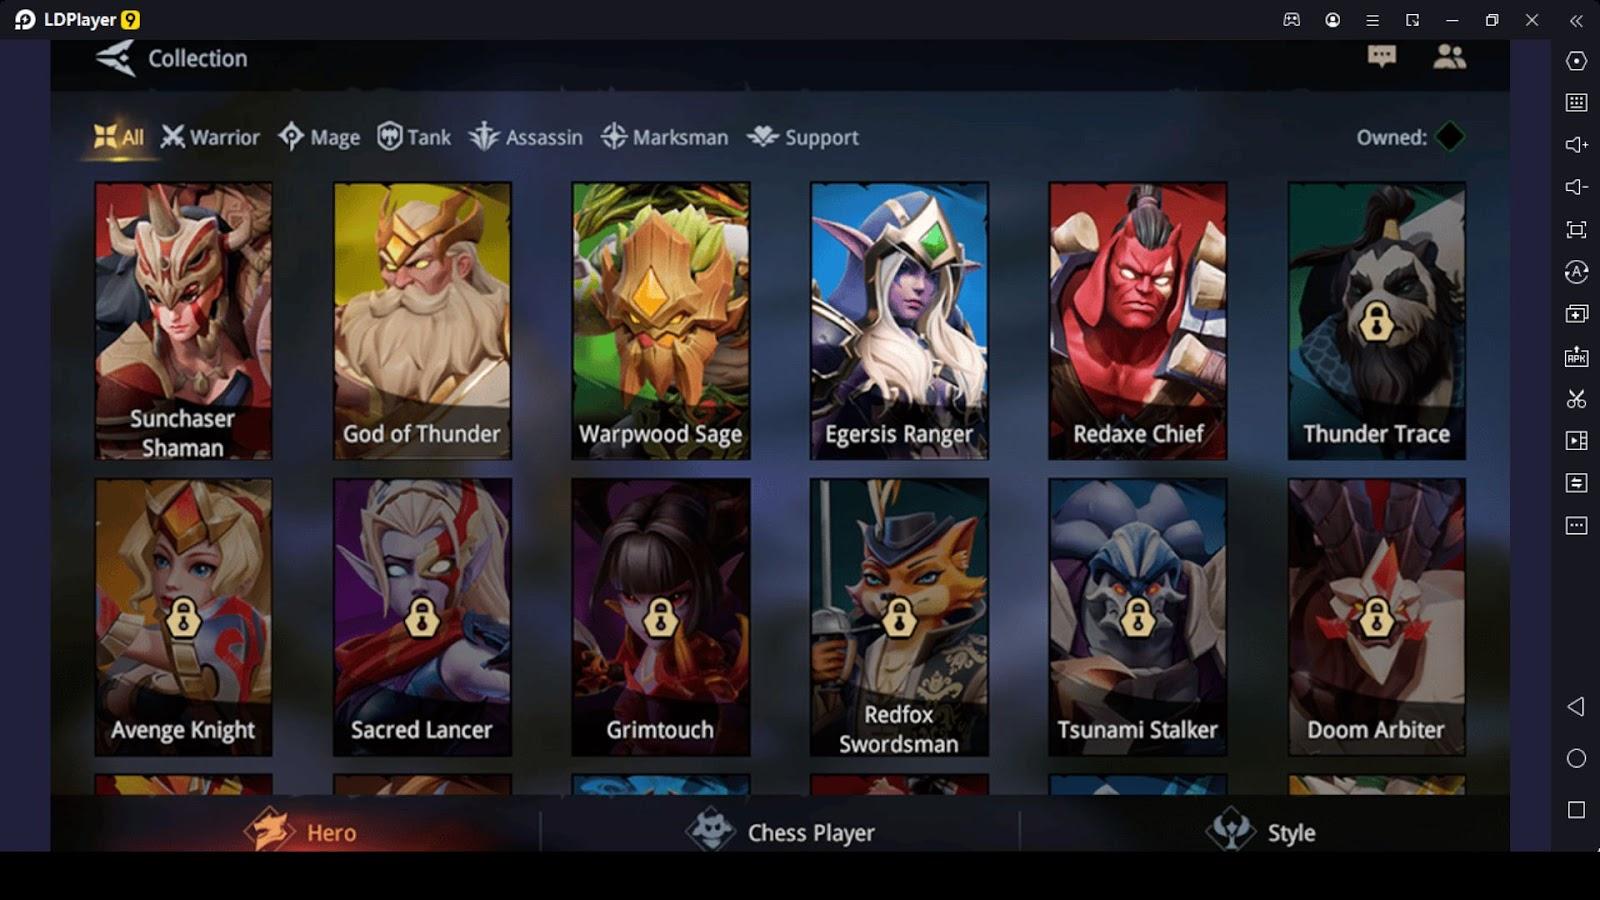 AutoChess Moba (AutoChess Moba) APK for Android - Free Download